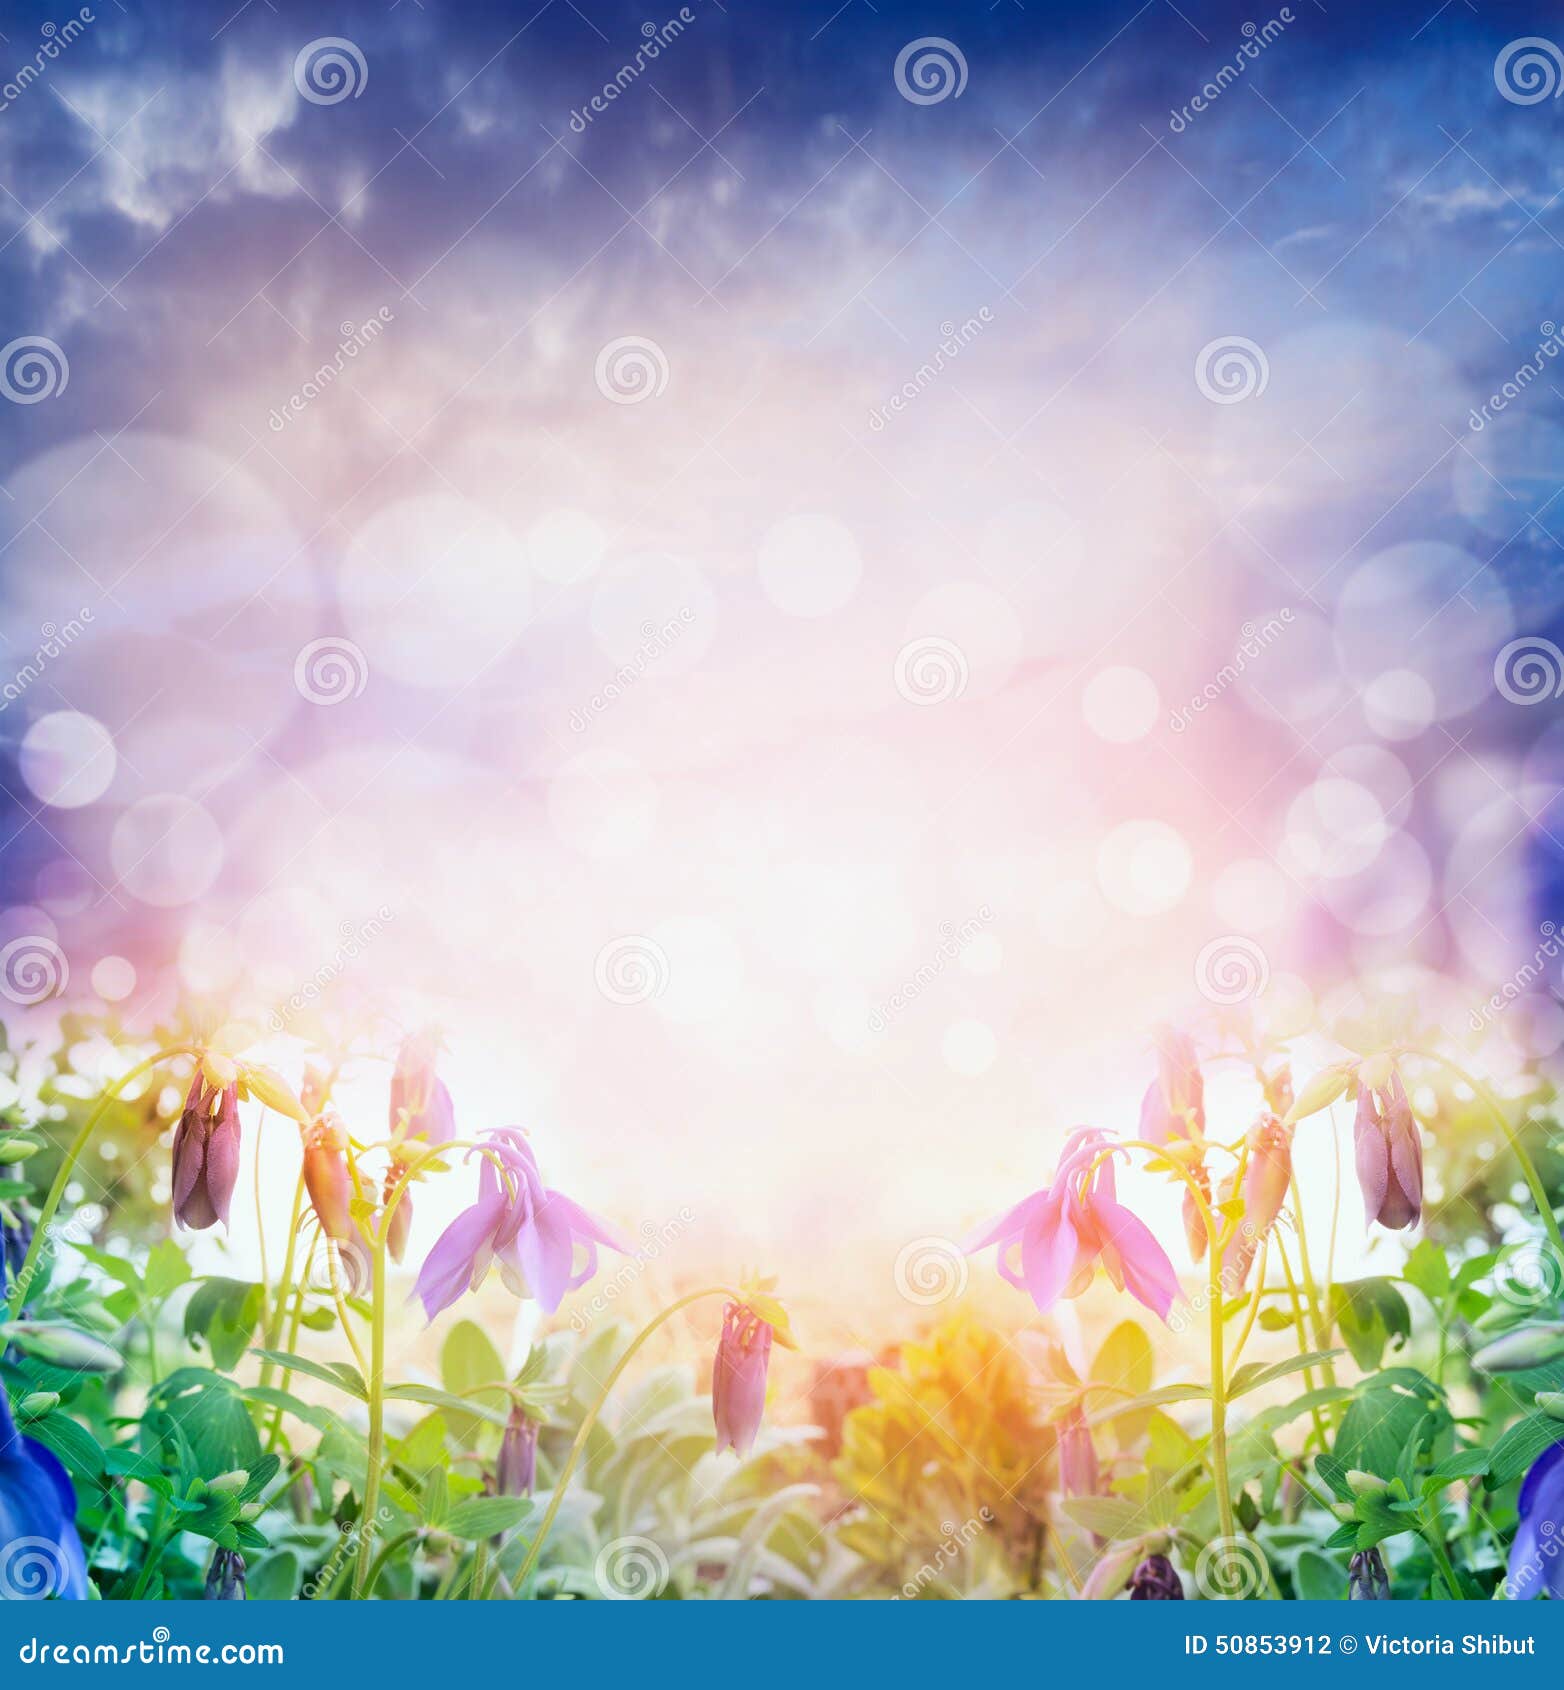 Light Nature Background With Summer Flowers Over Bokeh Stock Photo